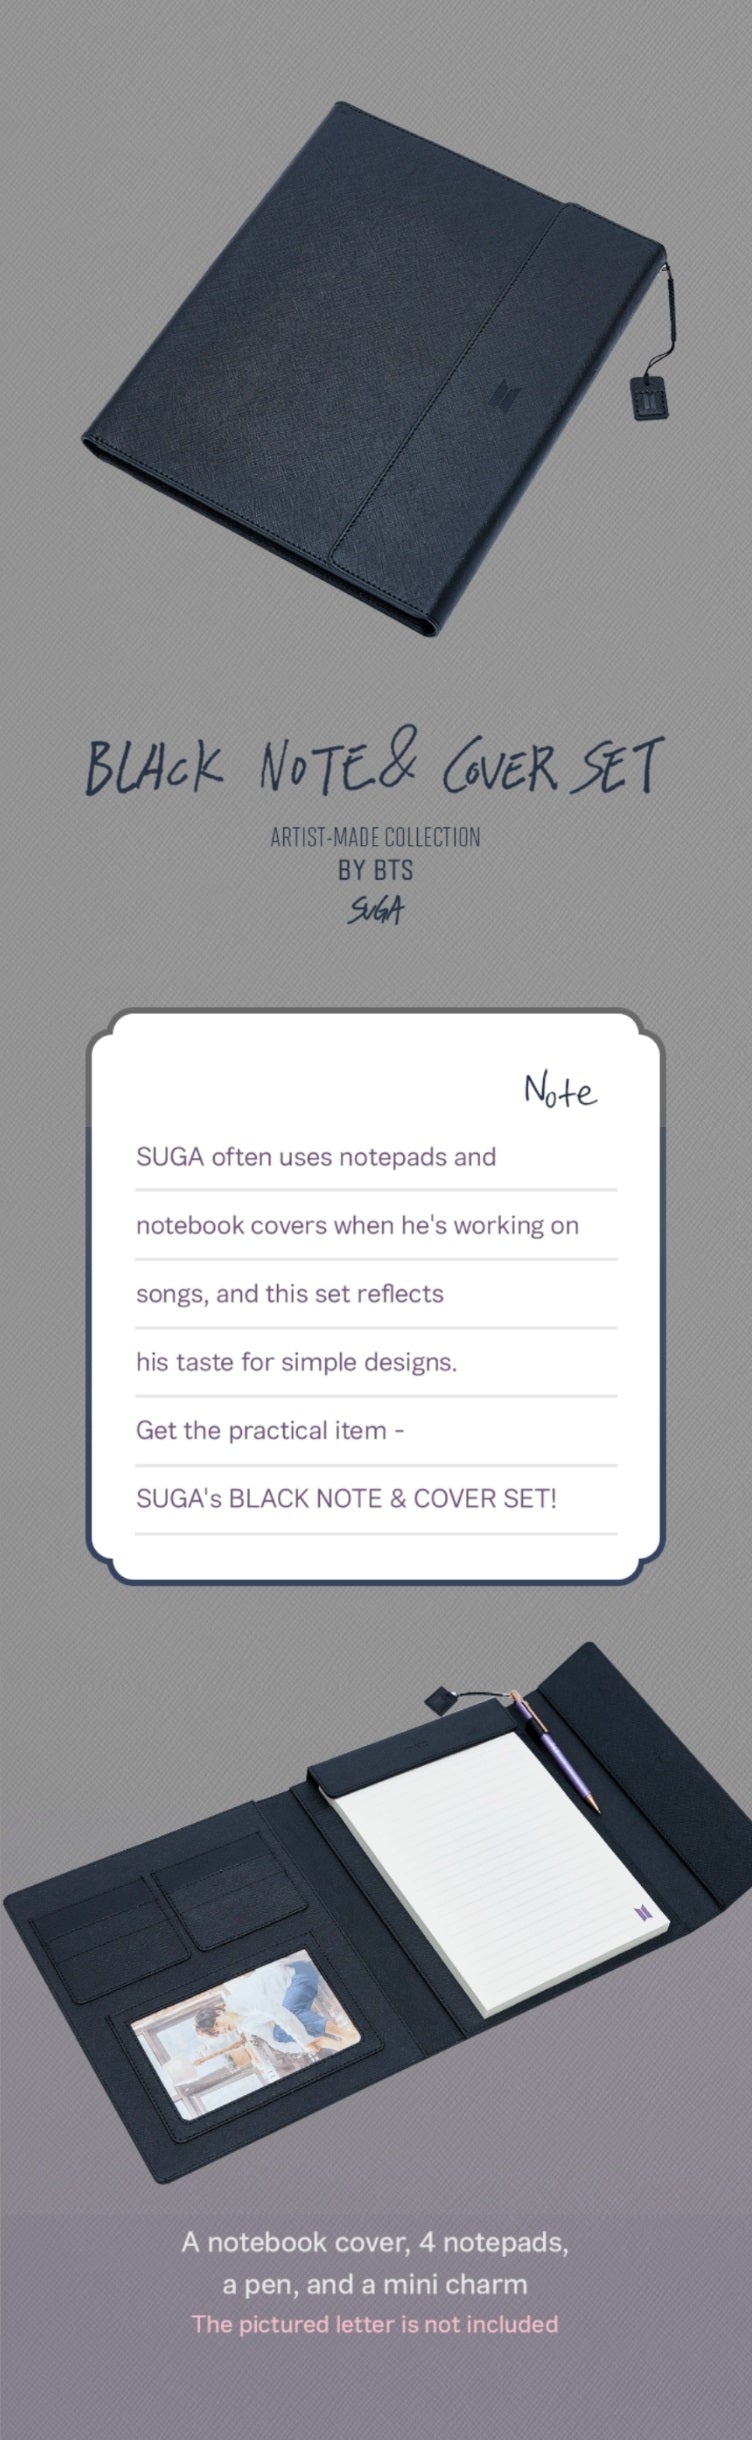 4TH PRE-ORDER] ARTIST-MADE COLLECTION BY BTS SUGA - COKODIVE